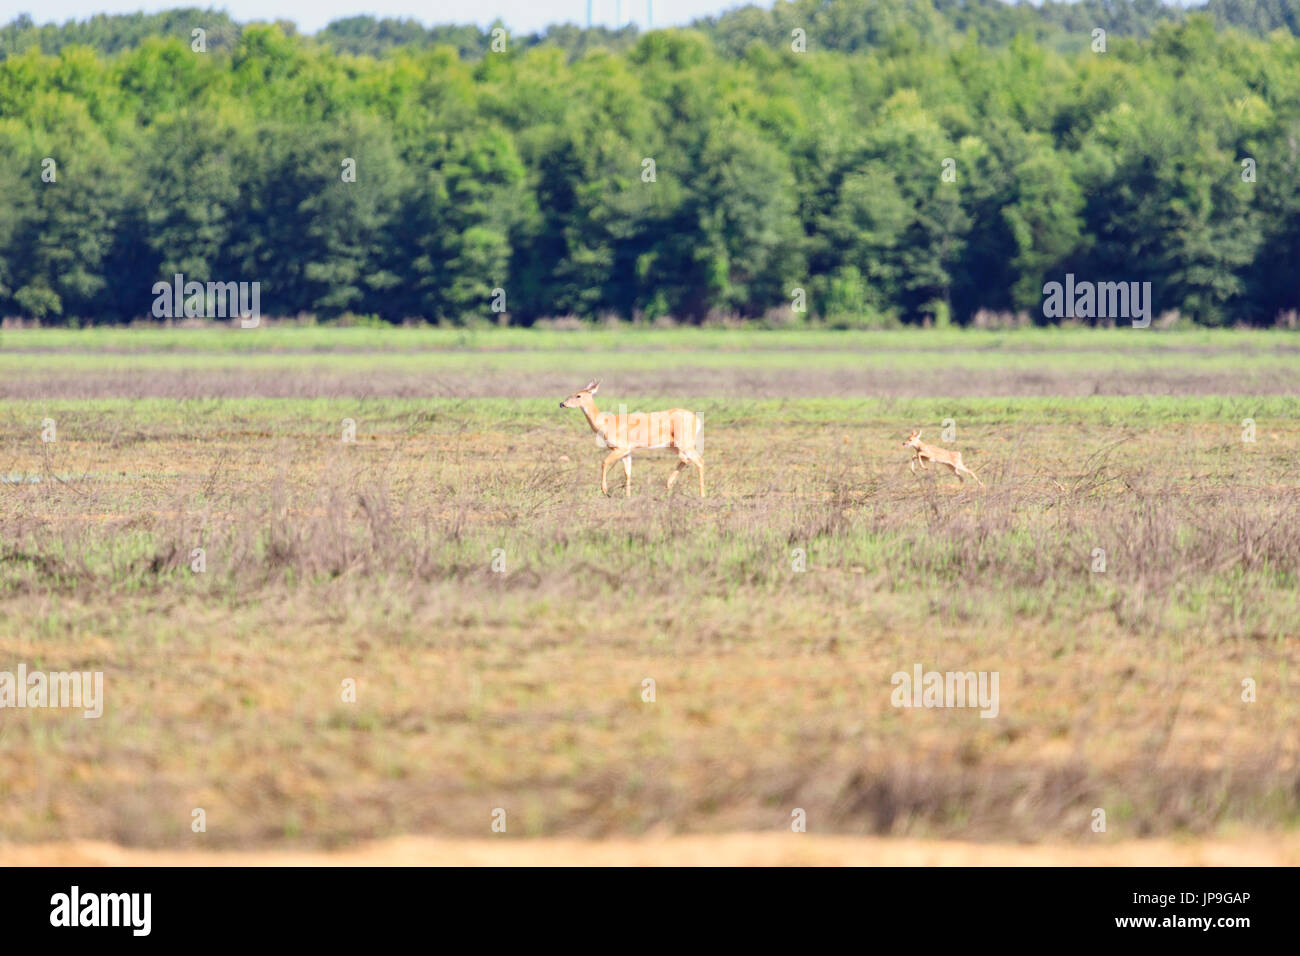 A white-tailed, Odocoileus virginianus, doe and her fawn walk across a field in Bald Knob Wildlife Refuge in Bald Knob, Arkansas Stock Photo